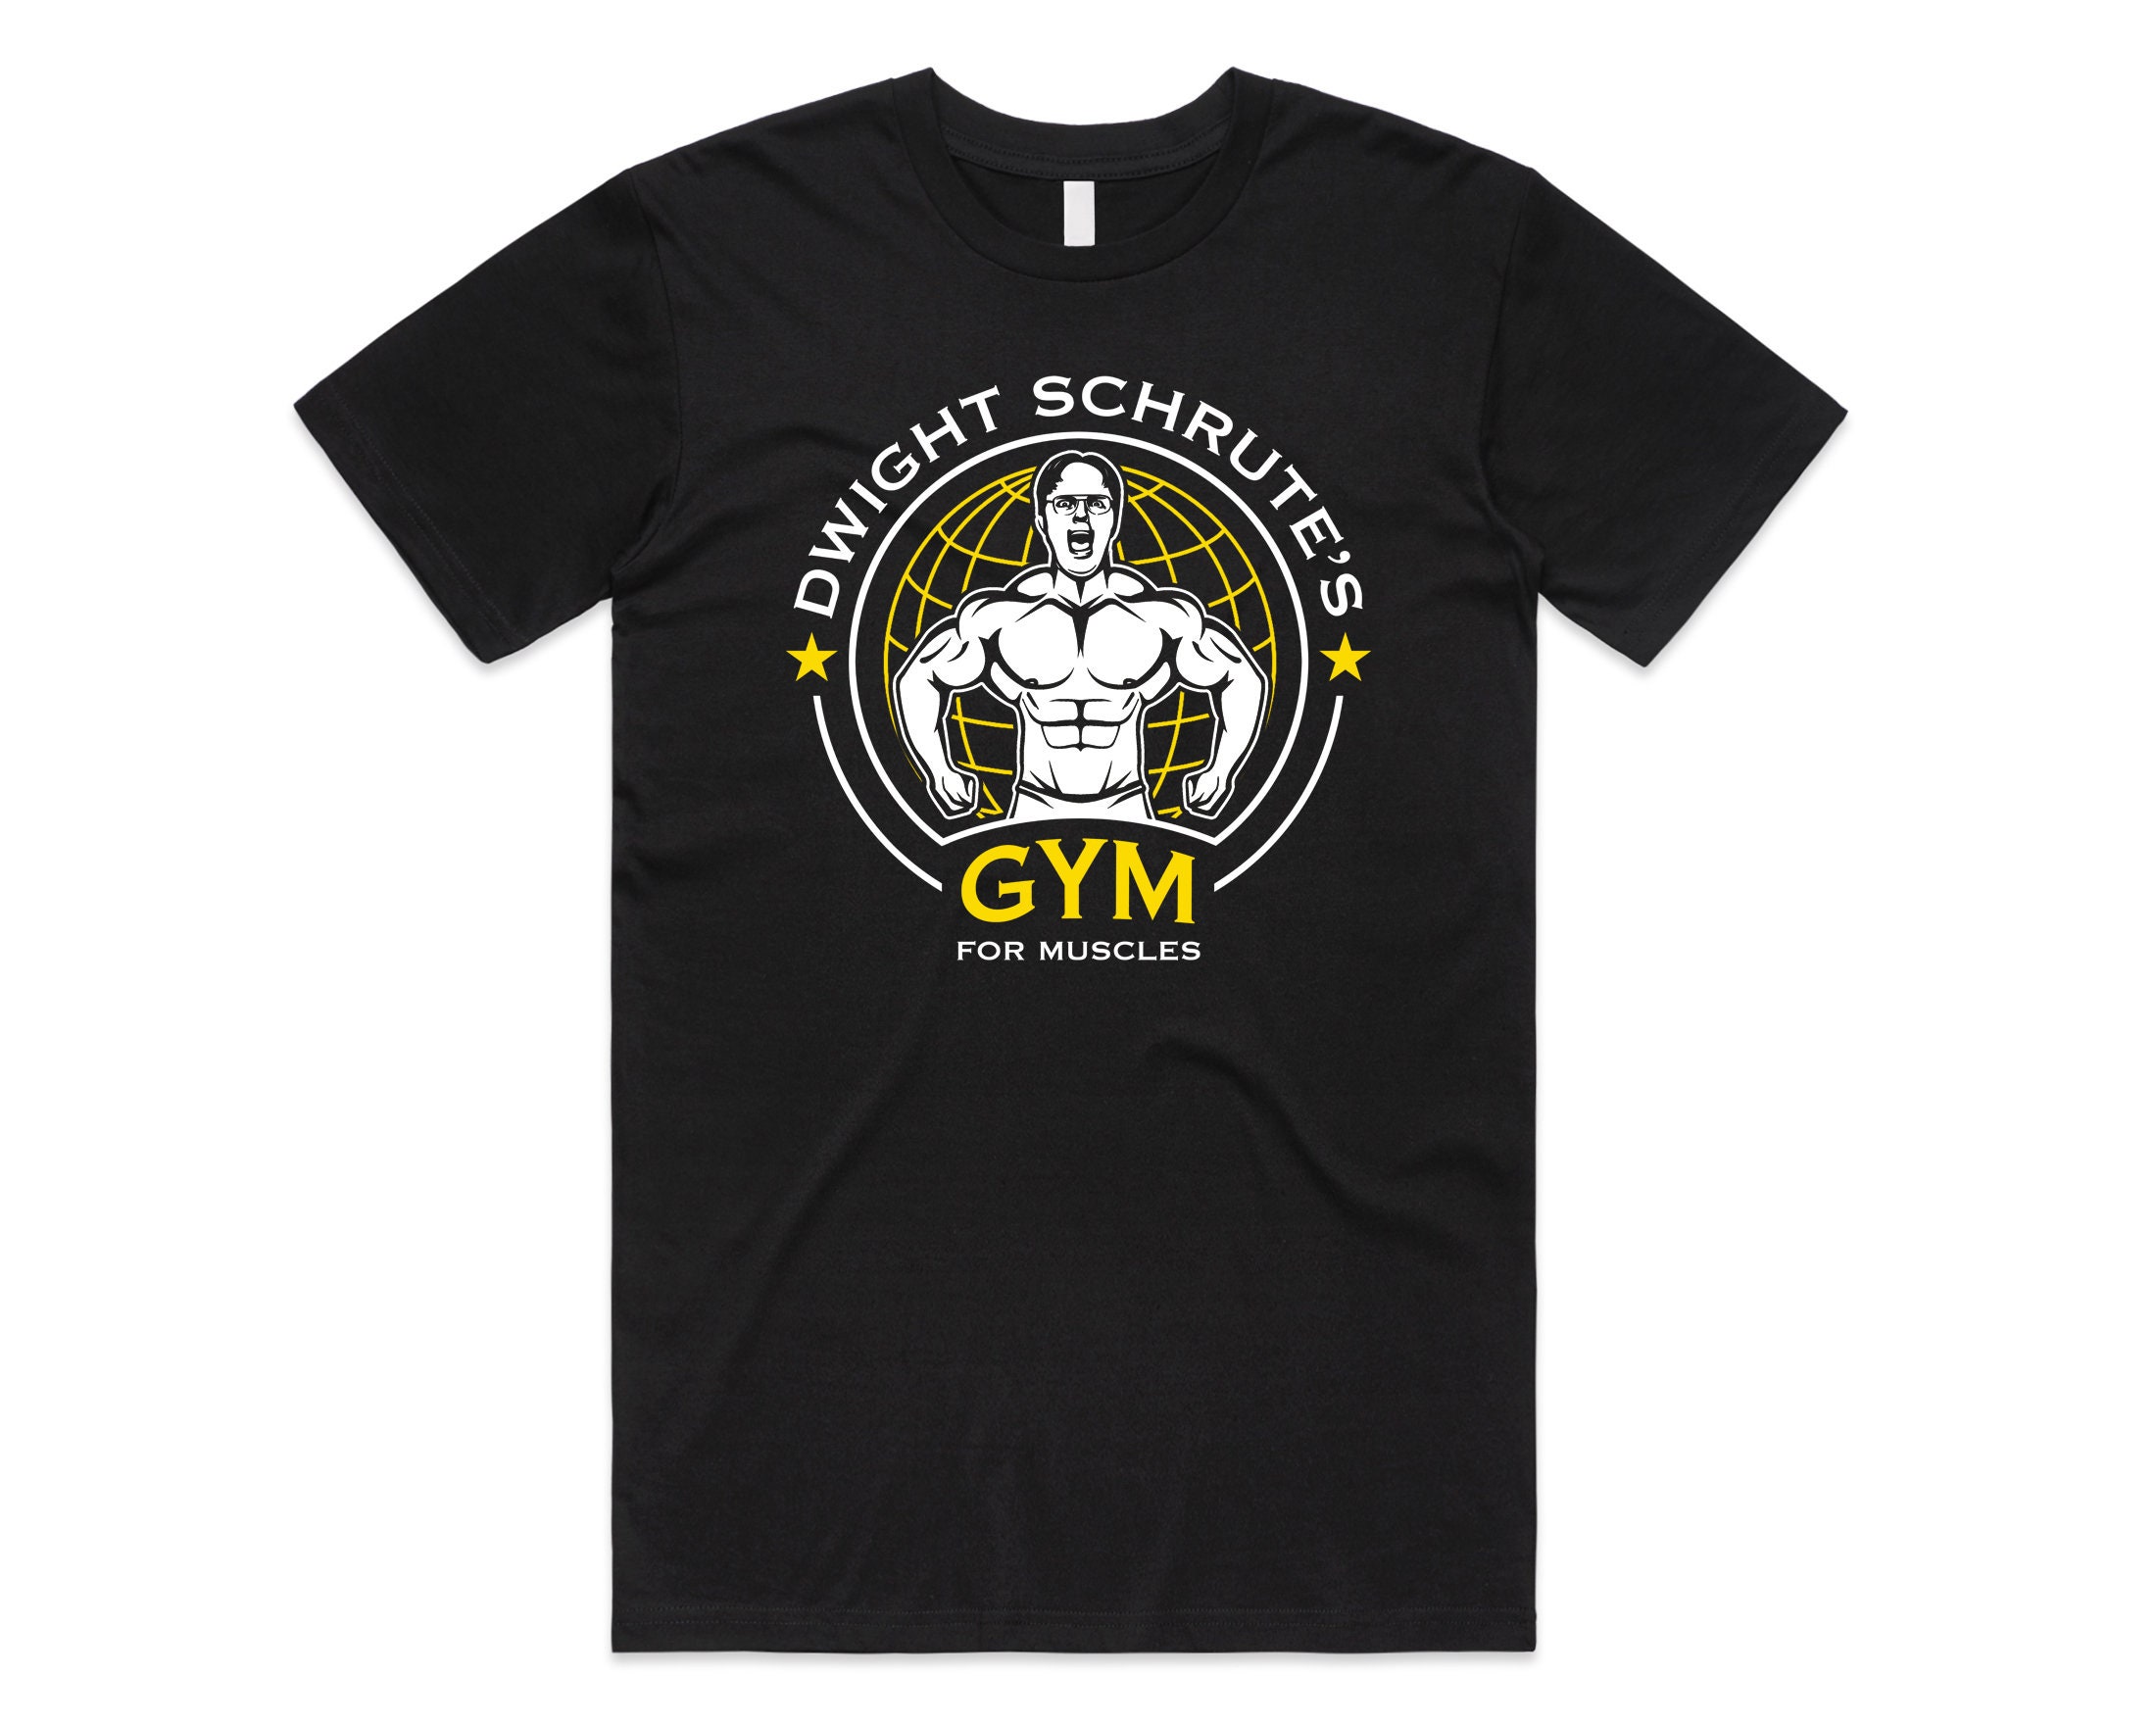 Dwight Schrute’s Gym For Muscles T-Shirt Tee Top Funny Us Office Dwight’s Bodybuilder Fitness Weightlifting Squat Gift